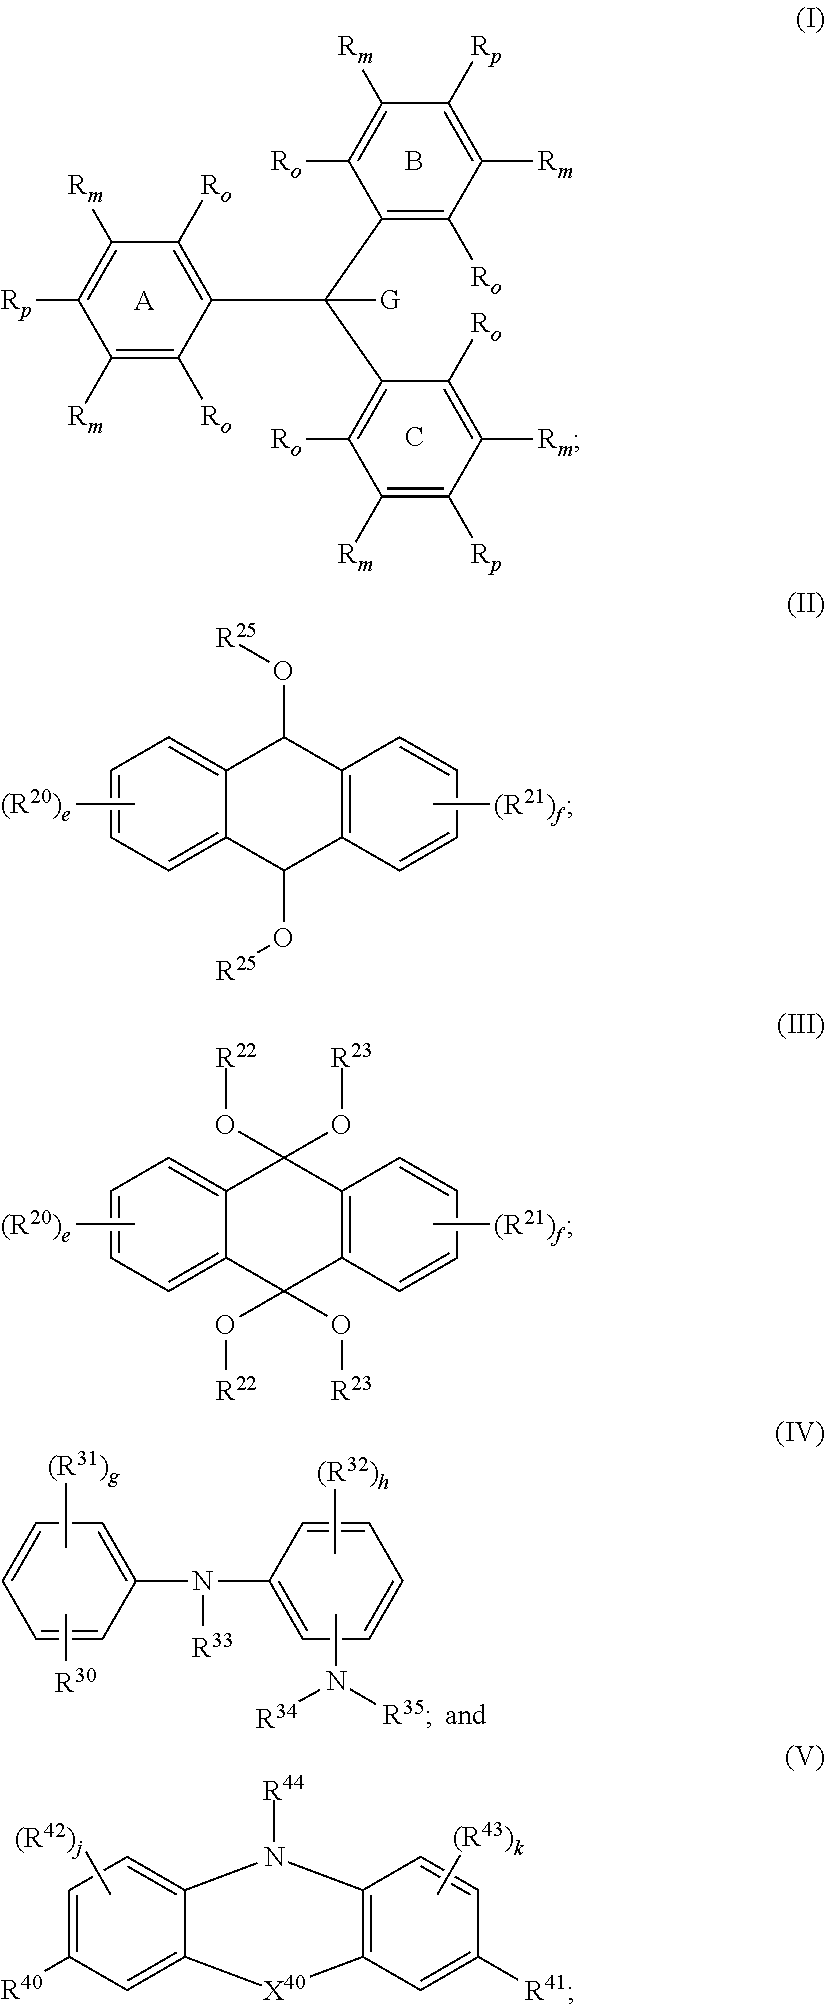 Leuco polymers as bluing agents in laundry care compositions